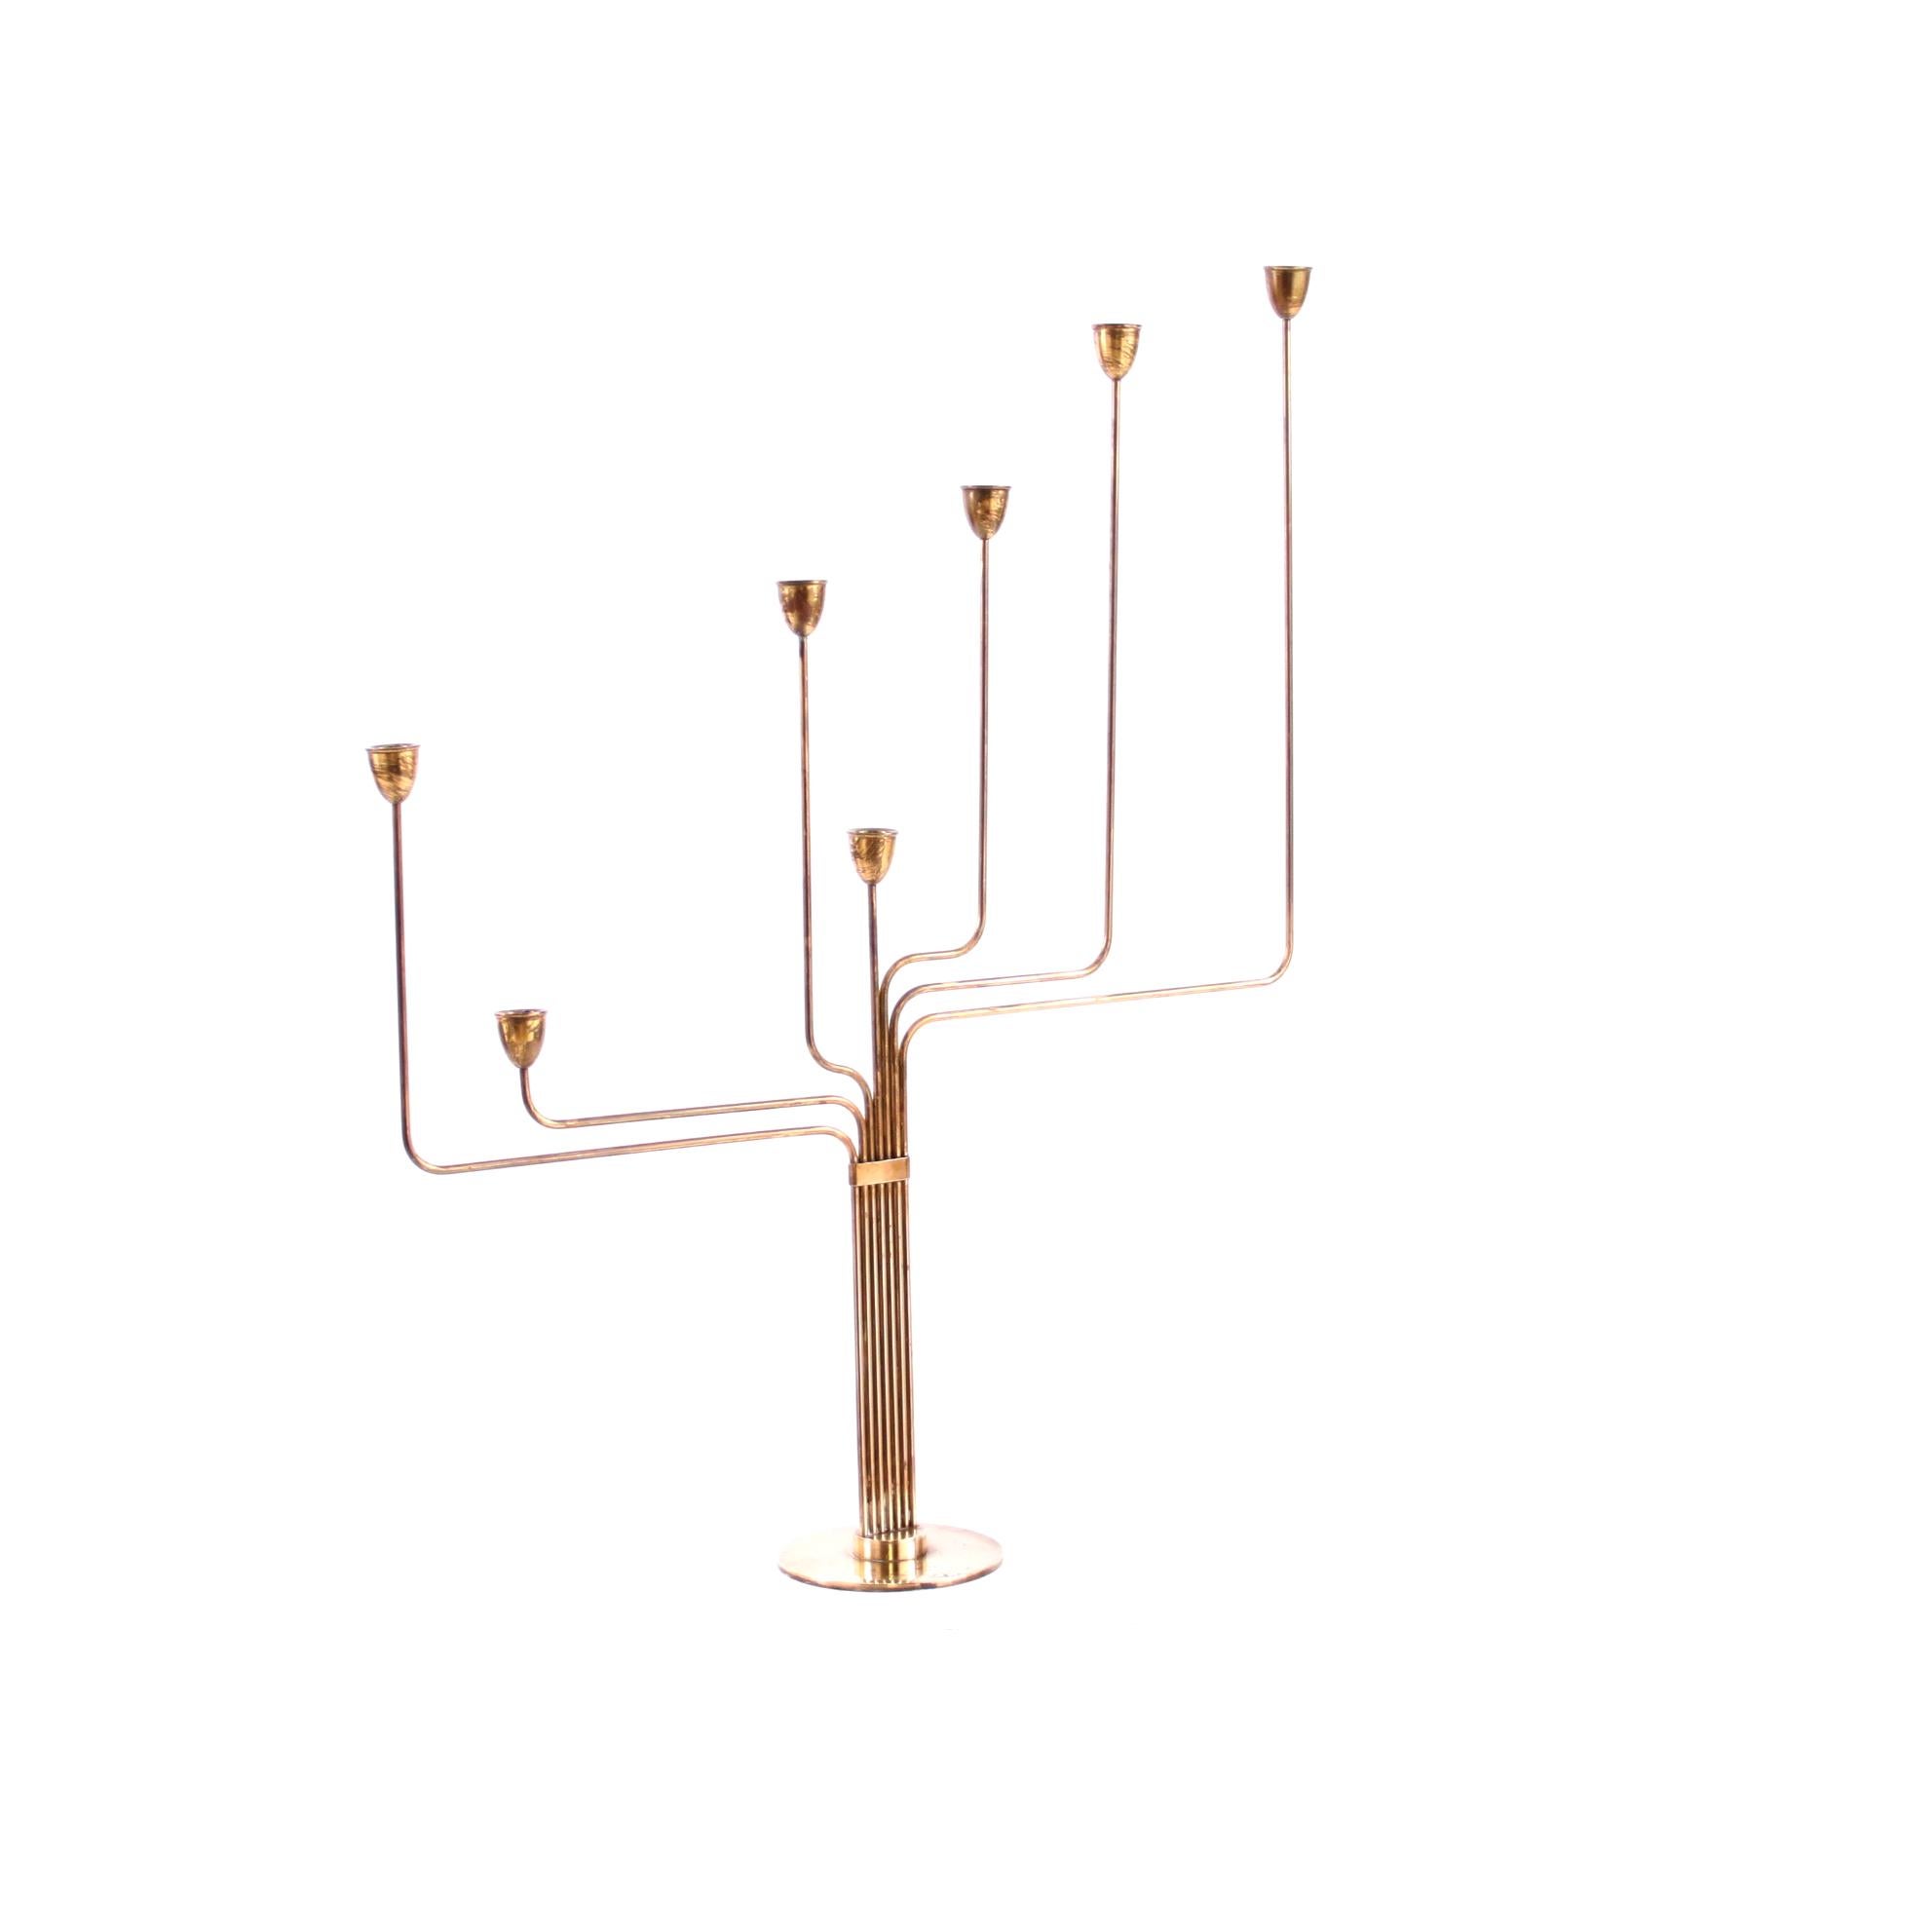 PIET HEIN   -   SCANDINAVIAN MODERN

First edition of the beautiful candelabrum by the Danish modernist and designer, poet, mathematician and architect Piet Hein. 

The candelabrum has seven arms and in solid brass. It was named 